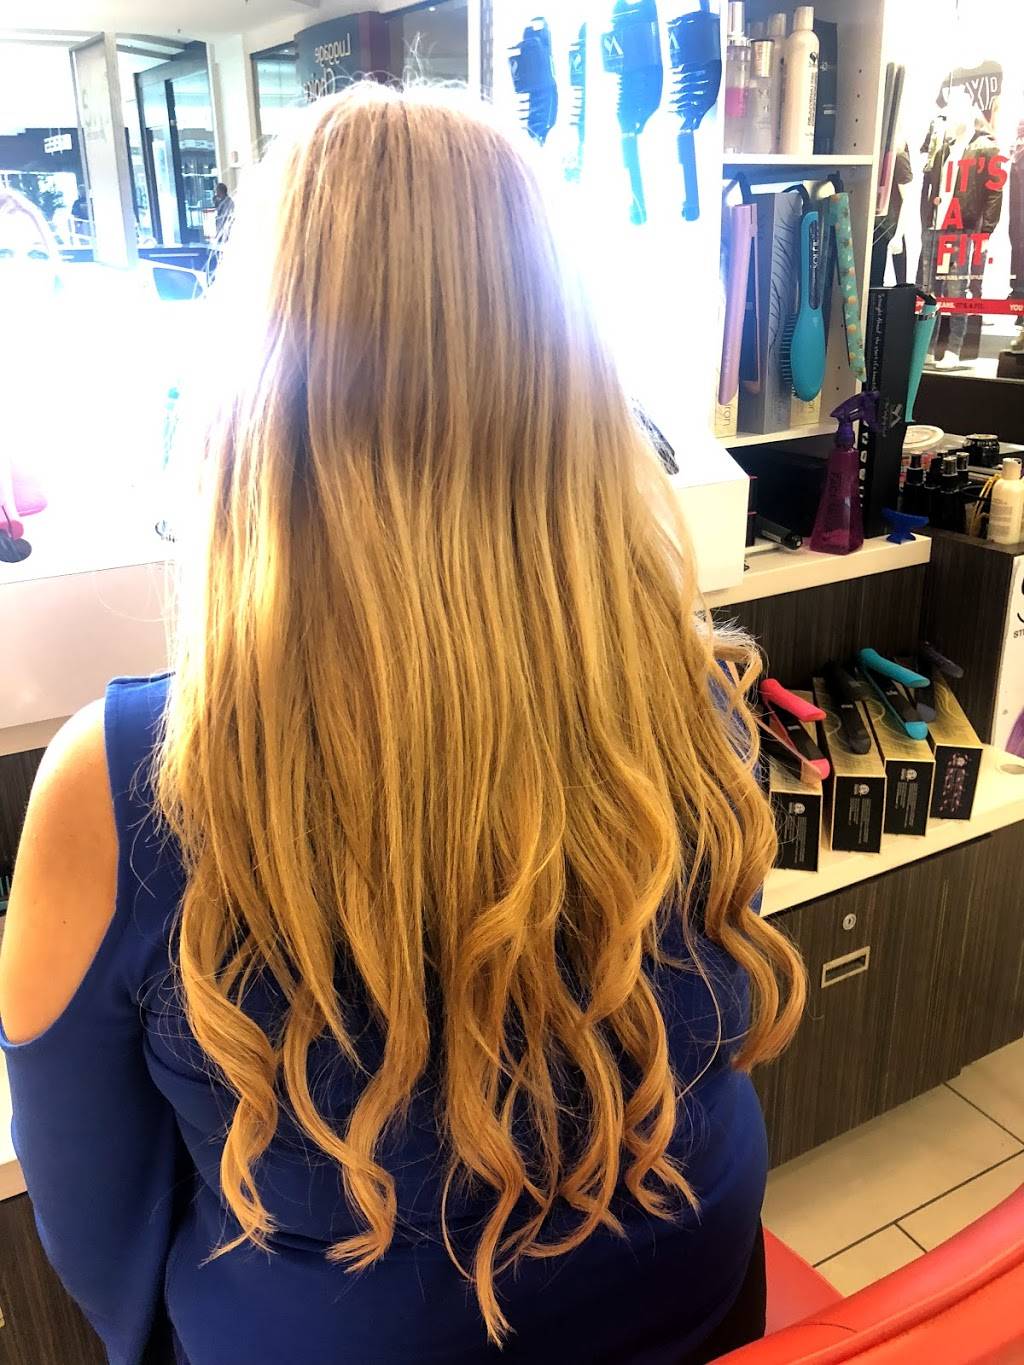 Soleil Beauty Hair Extensions | 8021 Citrus Park Town Center Mall, Tampa, FL 33625 | Phone: (786) 327-8320